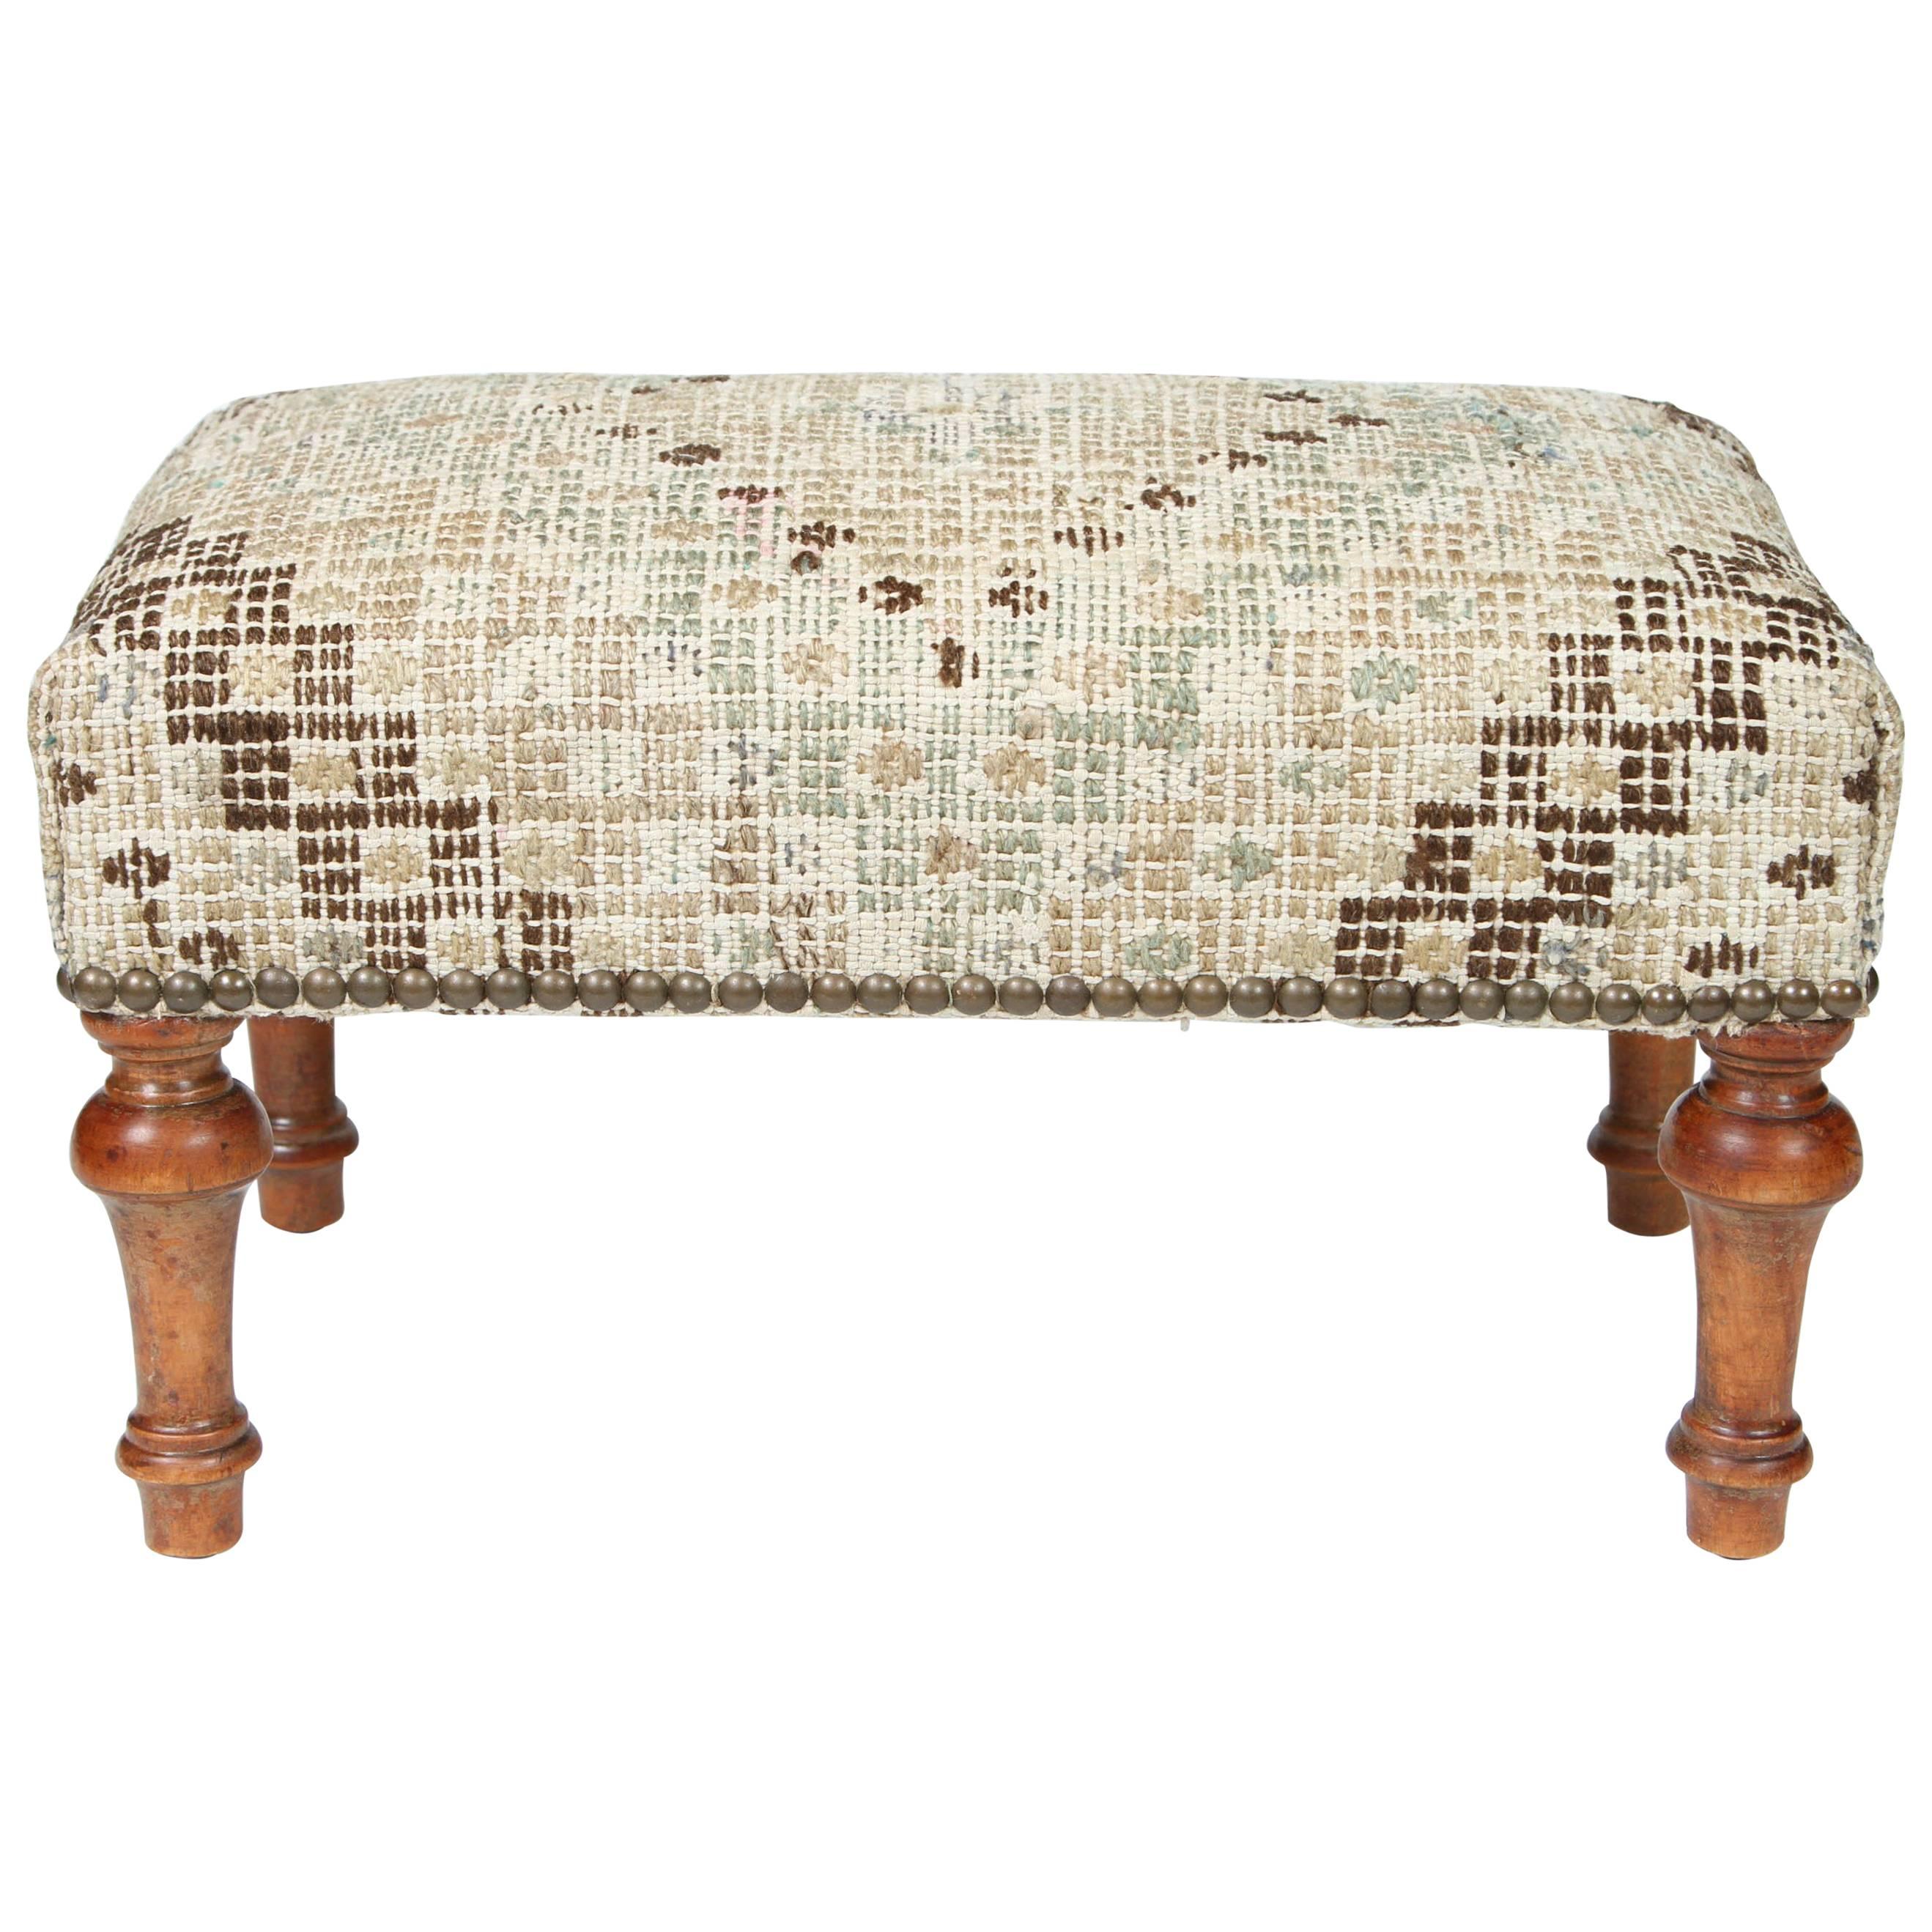 Vintage Footstool Newly Upholstered in Turkish Rug